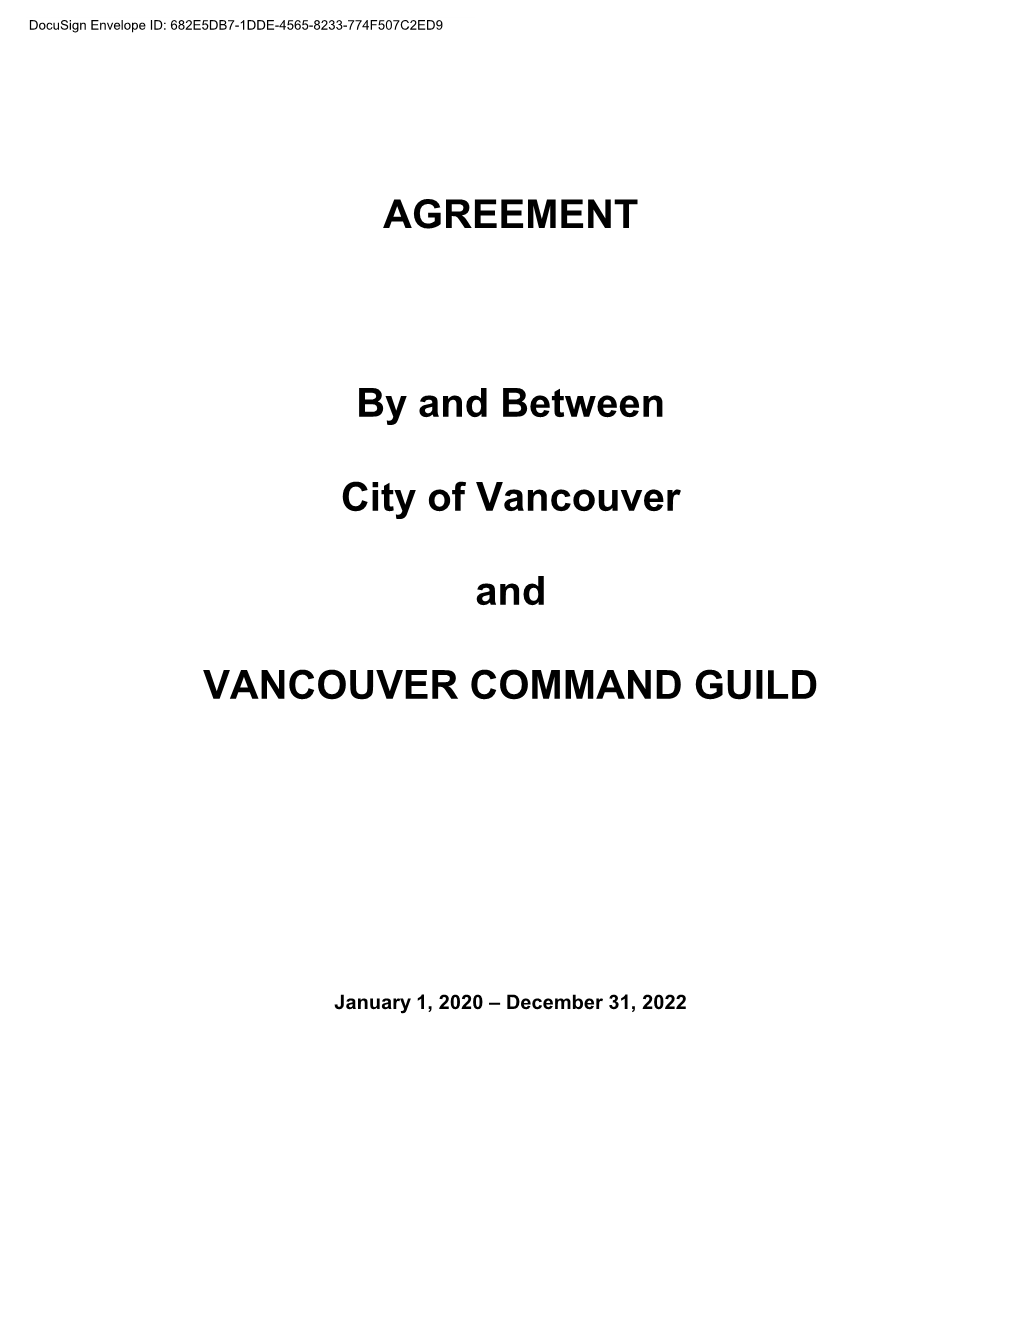 AGREEMENT by and Between City of Vancouver and VANCOUVER COMMAND GUILD